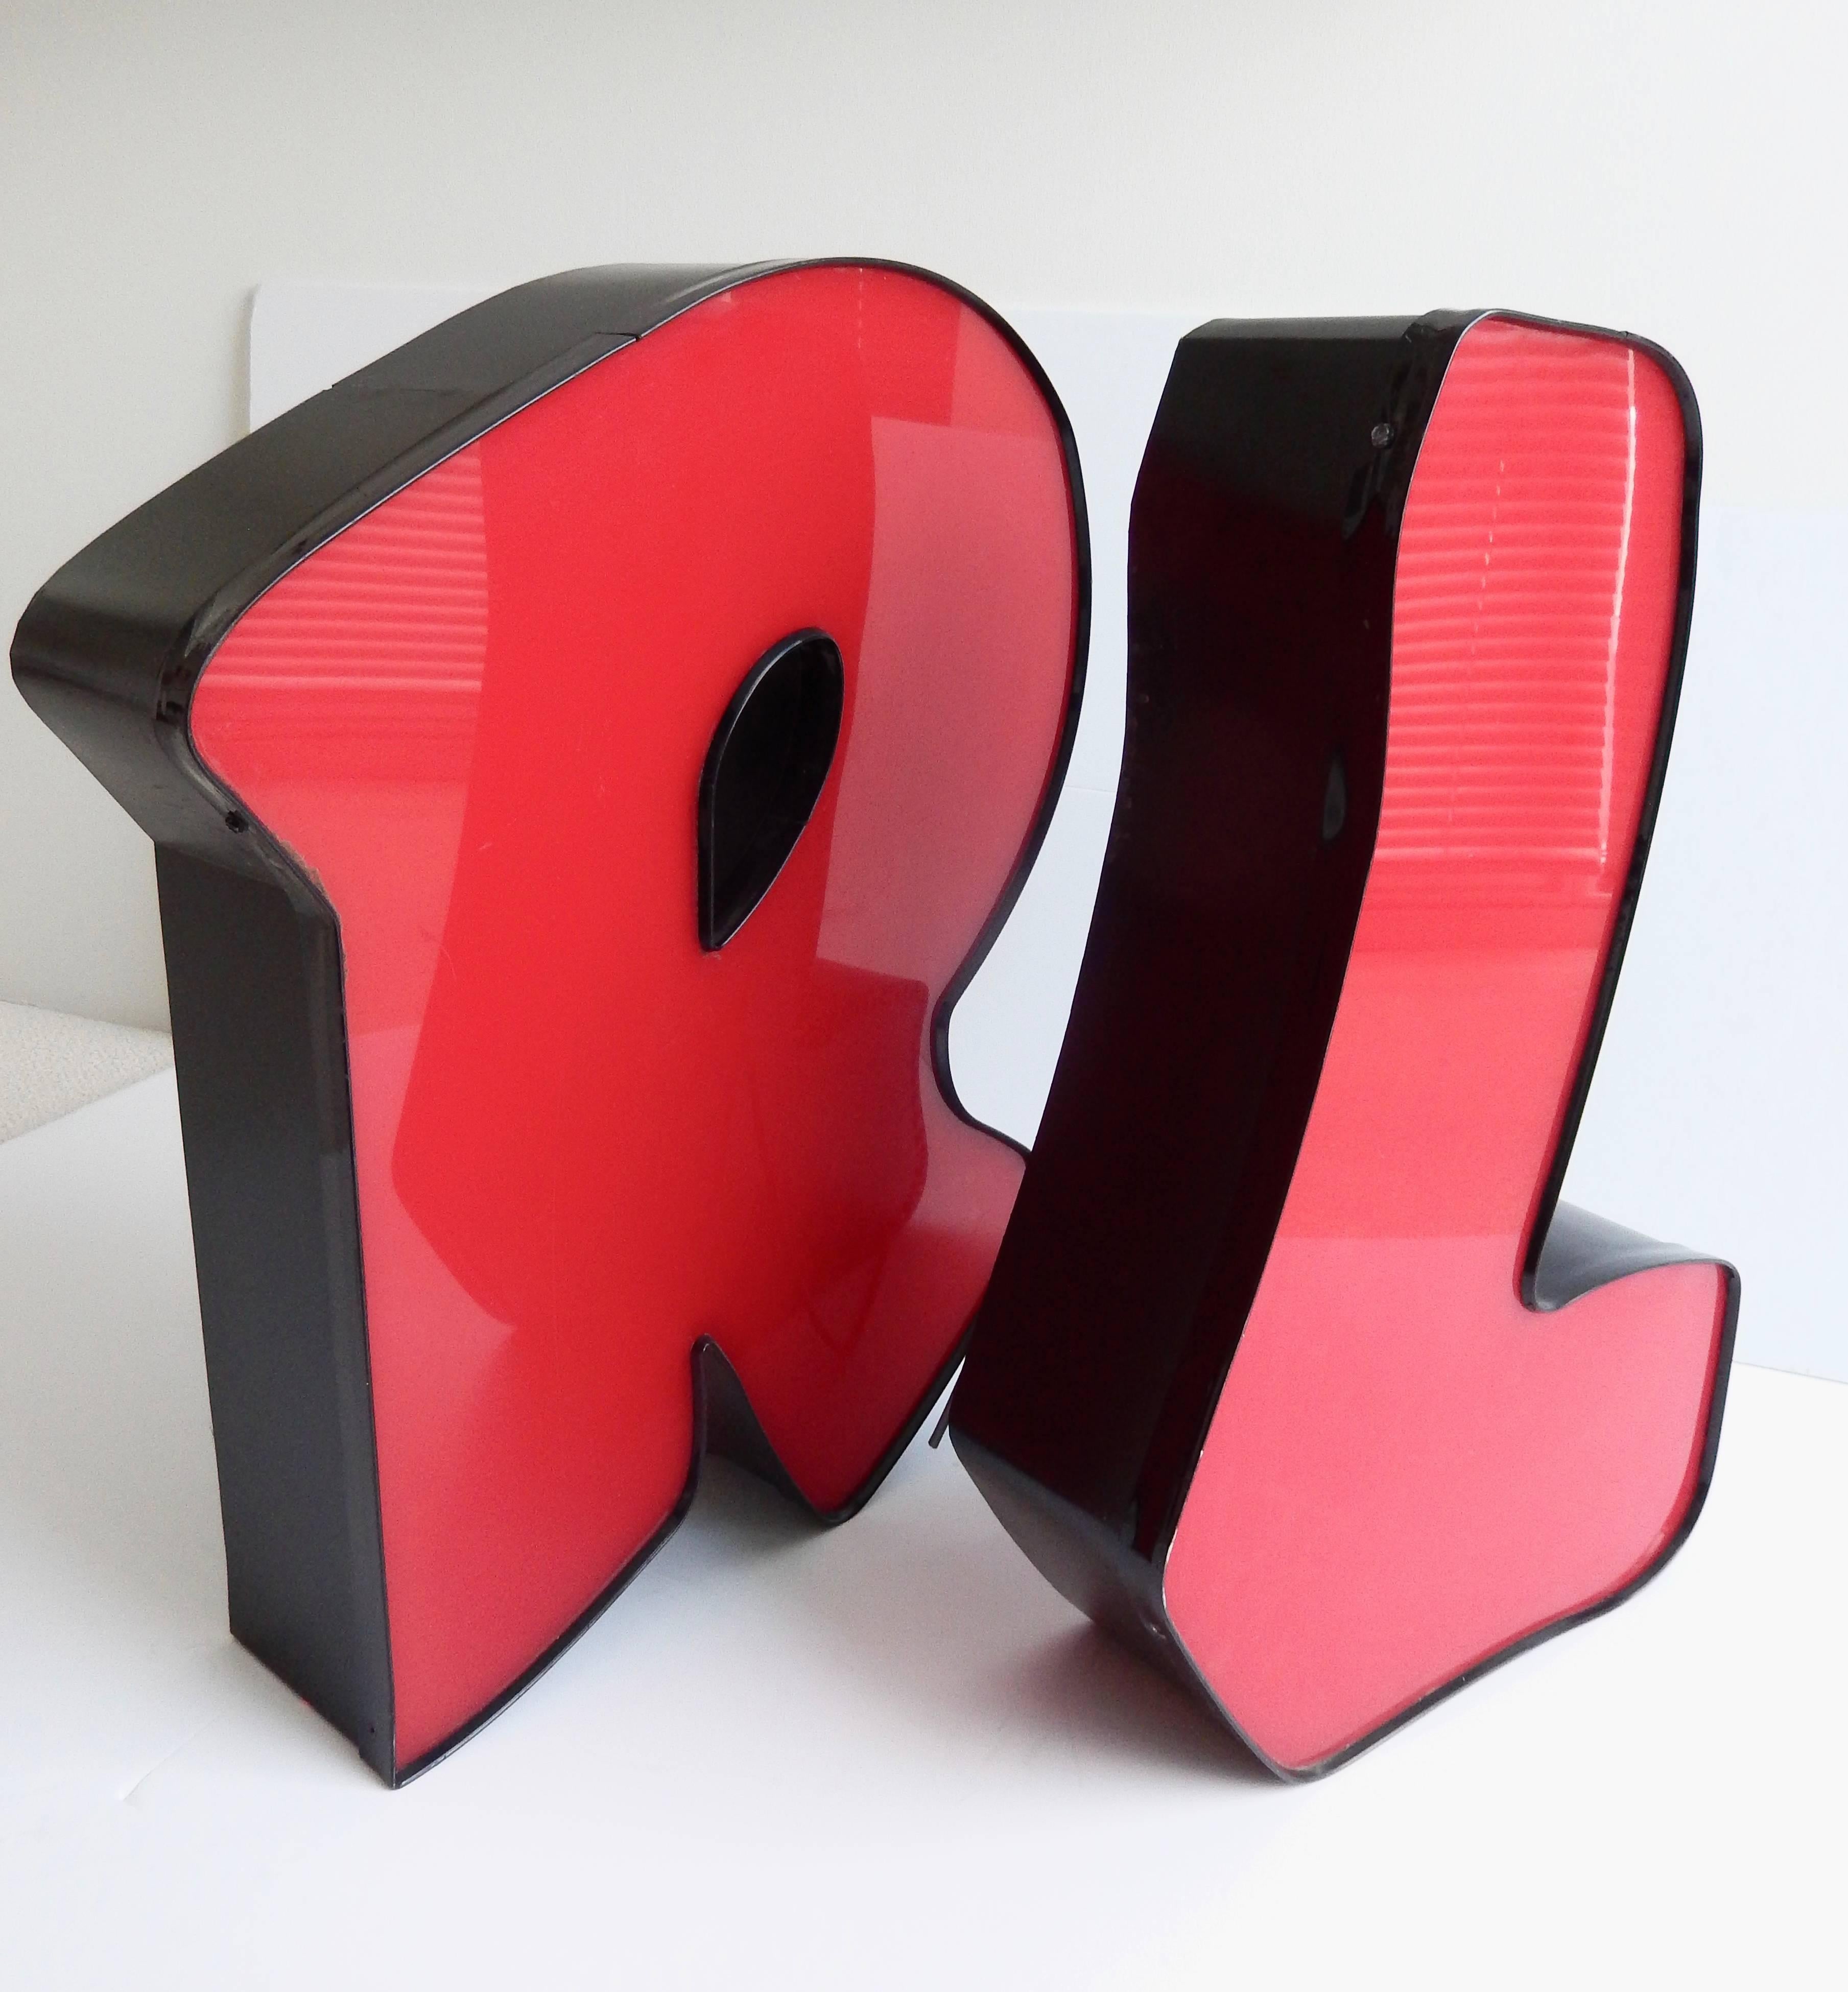 A pair of large cherry red acrylic letters in a friendly font reminiscent of comic sans. Both are freestanding, 